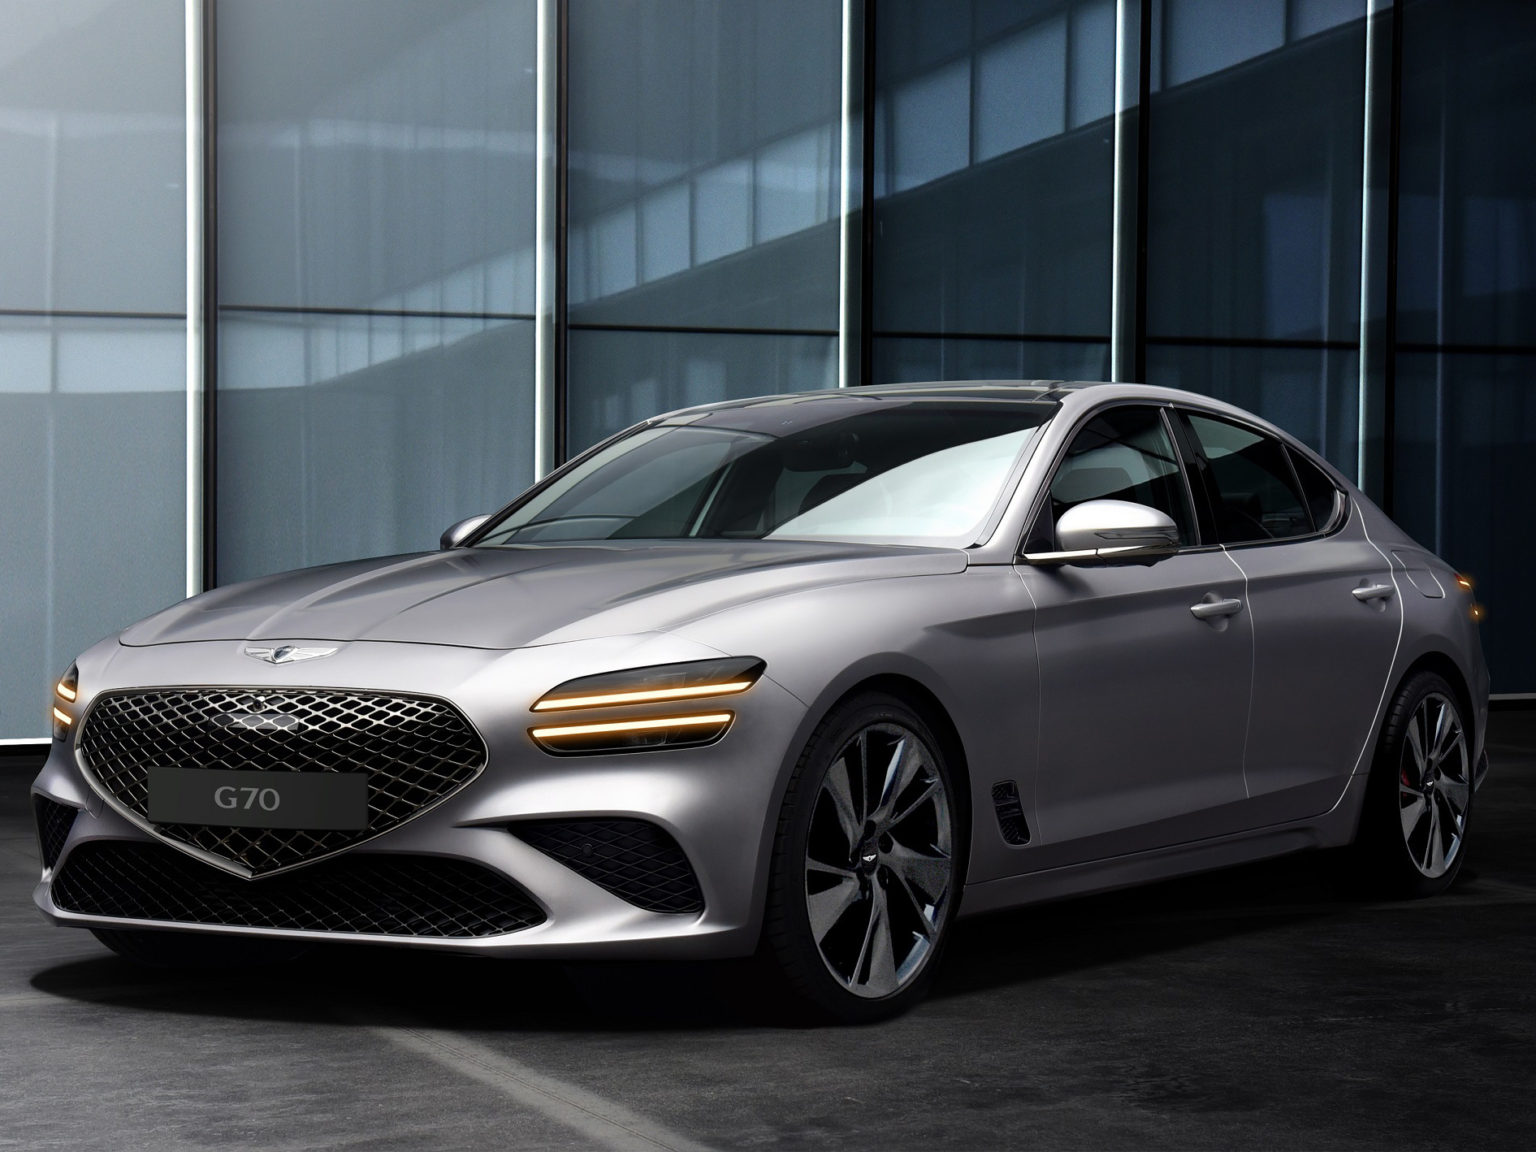 The Genesis G70 is getting familiar family styling for 2021.